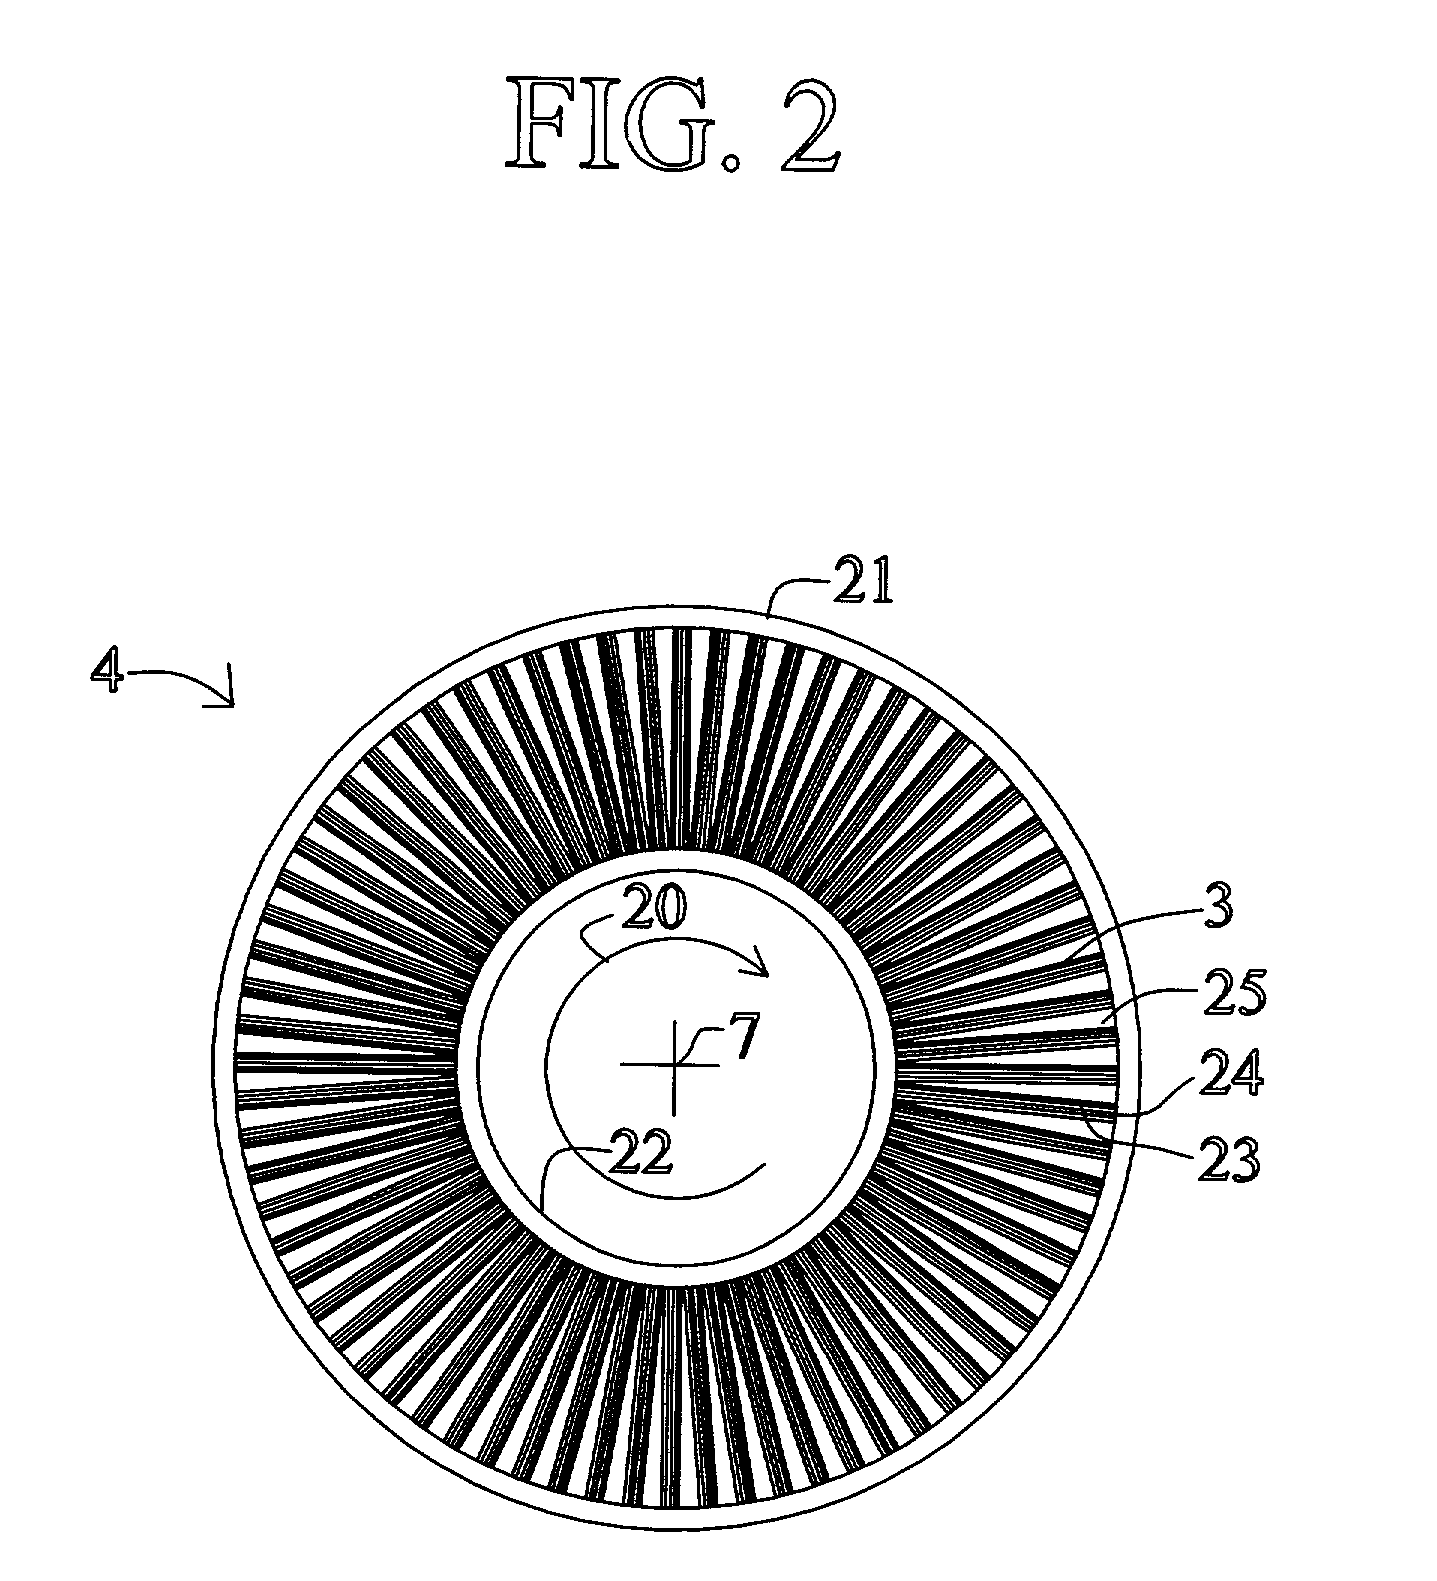 Systems and processes for providing hydrogen to fuel cells